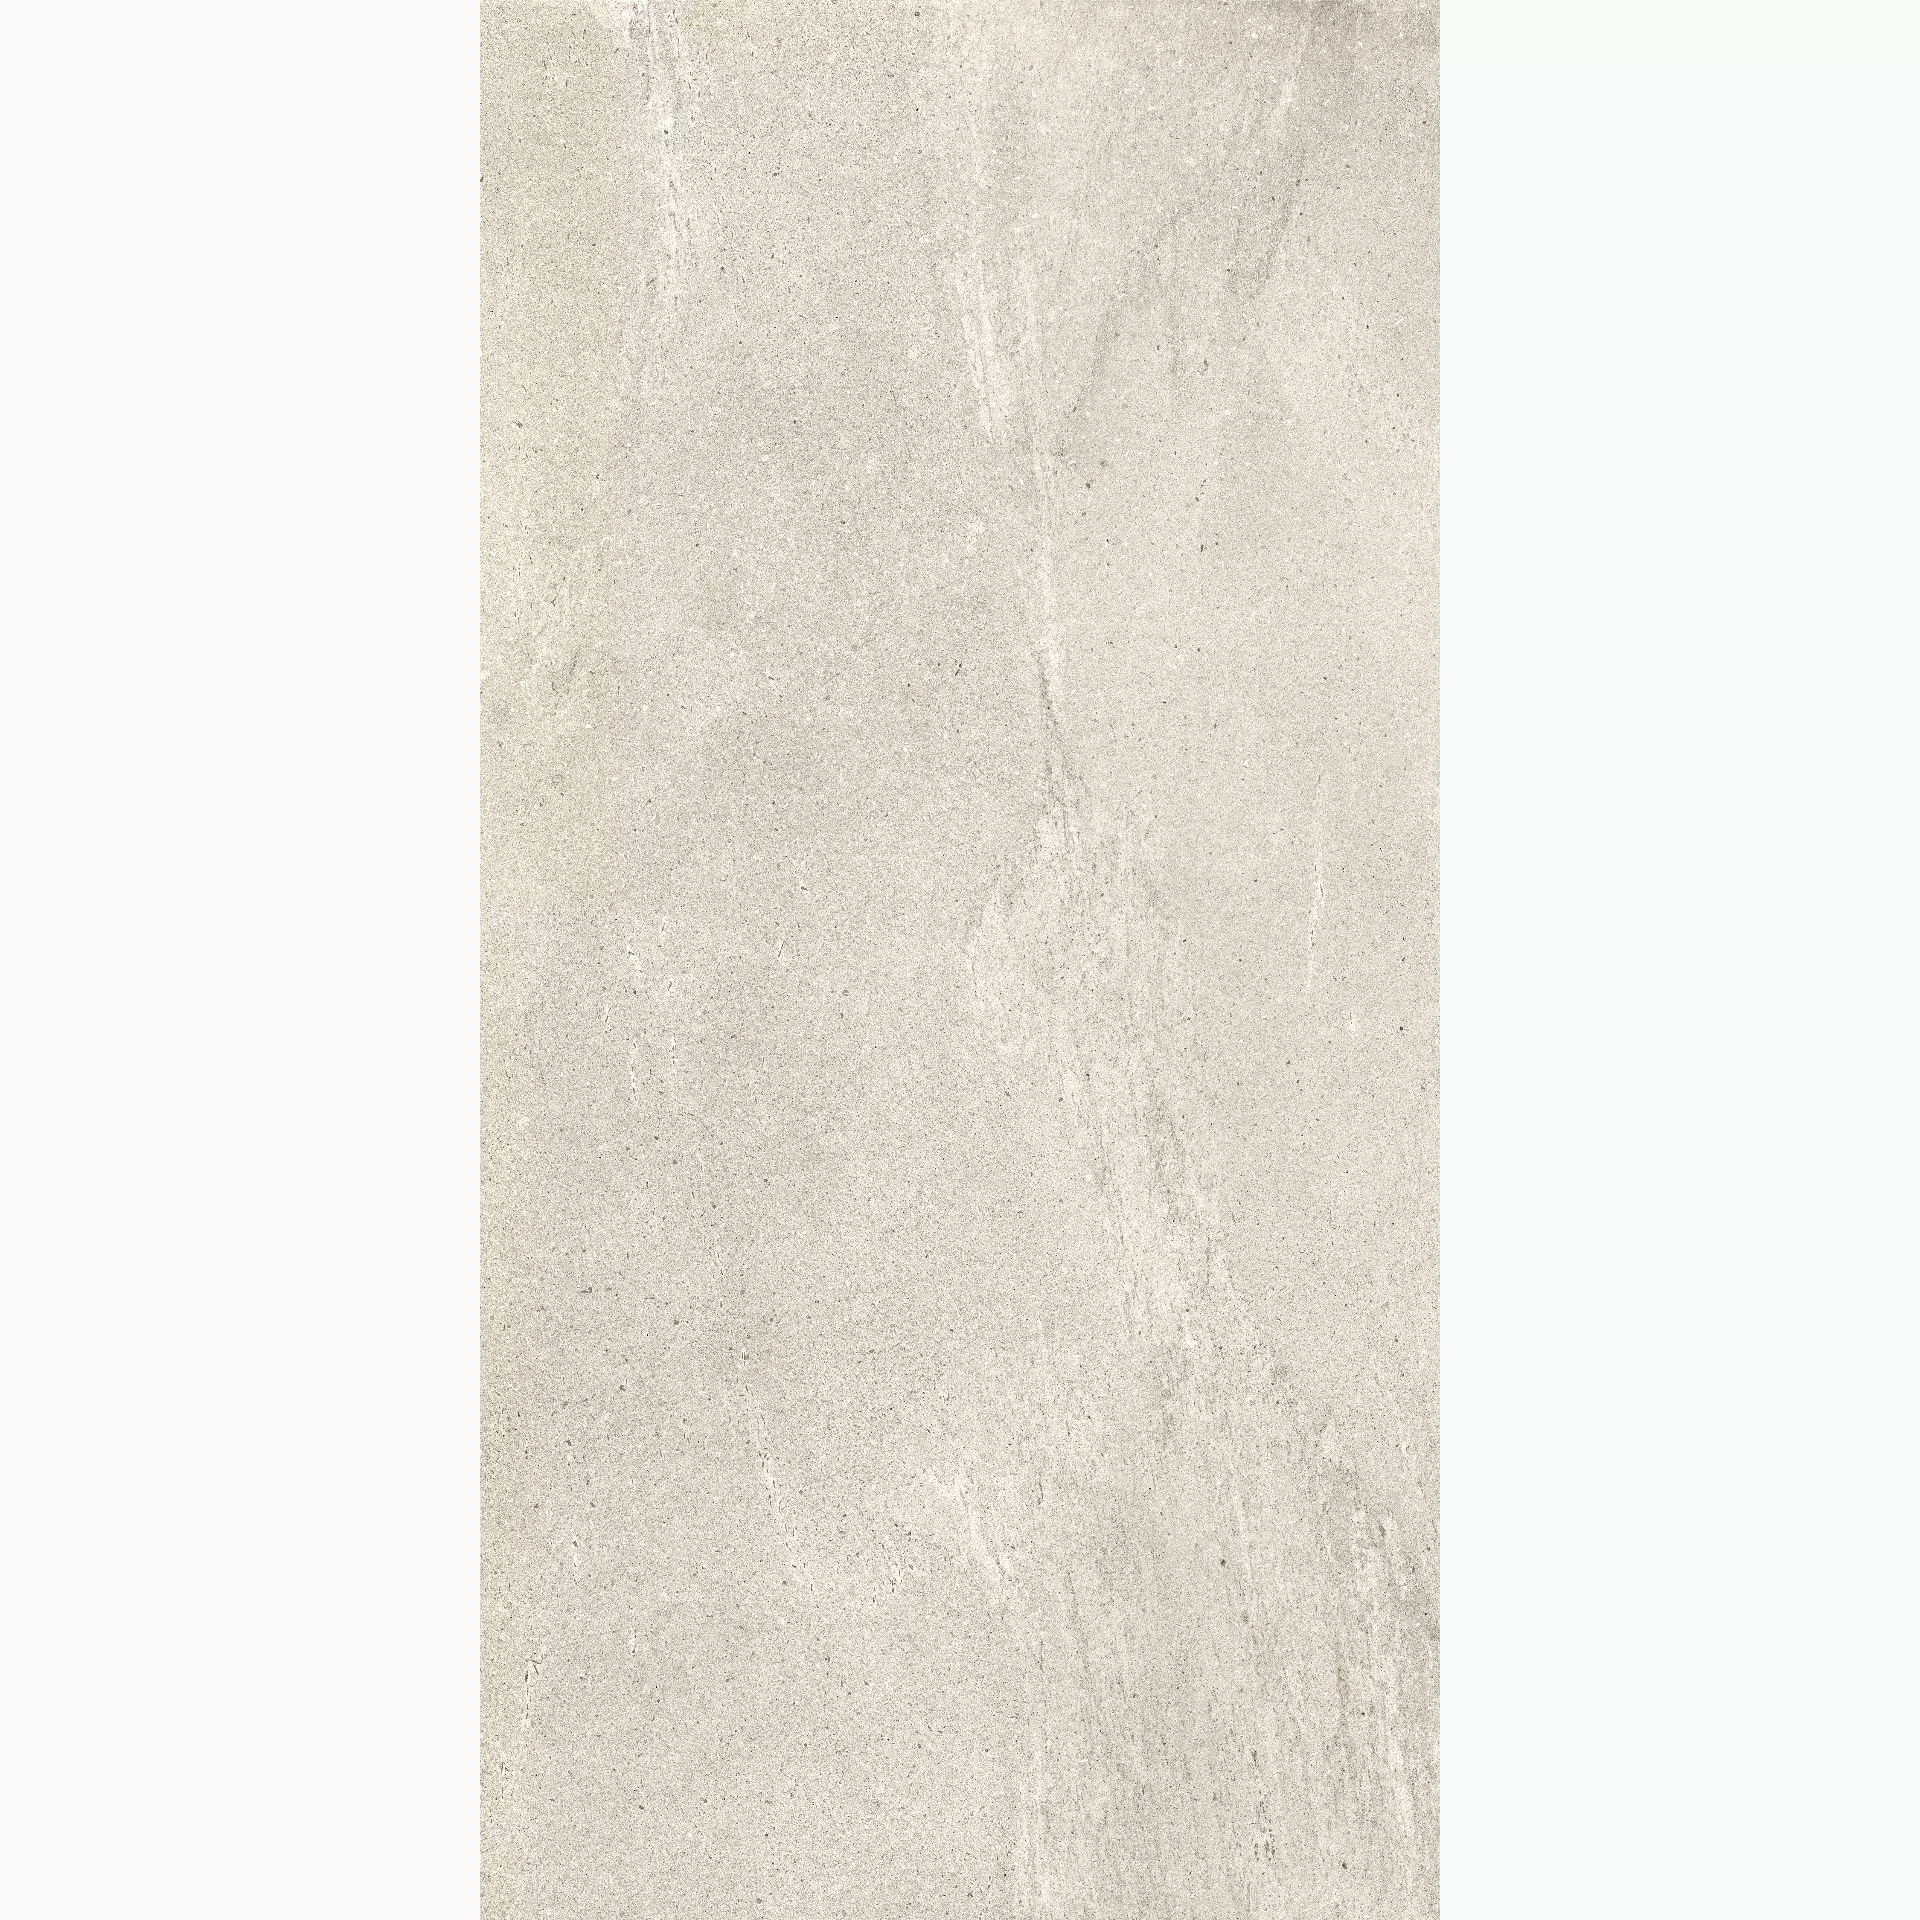 Cottodeste Blend Stone Clear Naturale Protect EGEBS00 90x180cm rectified 14mm